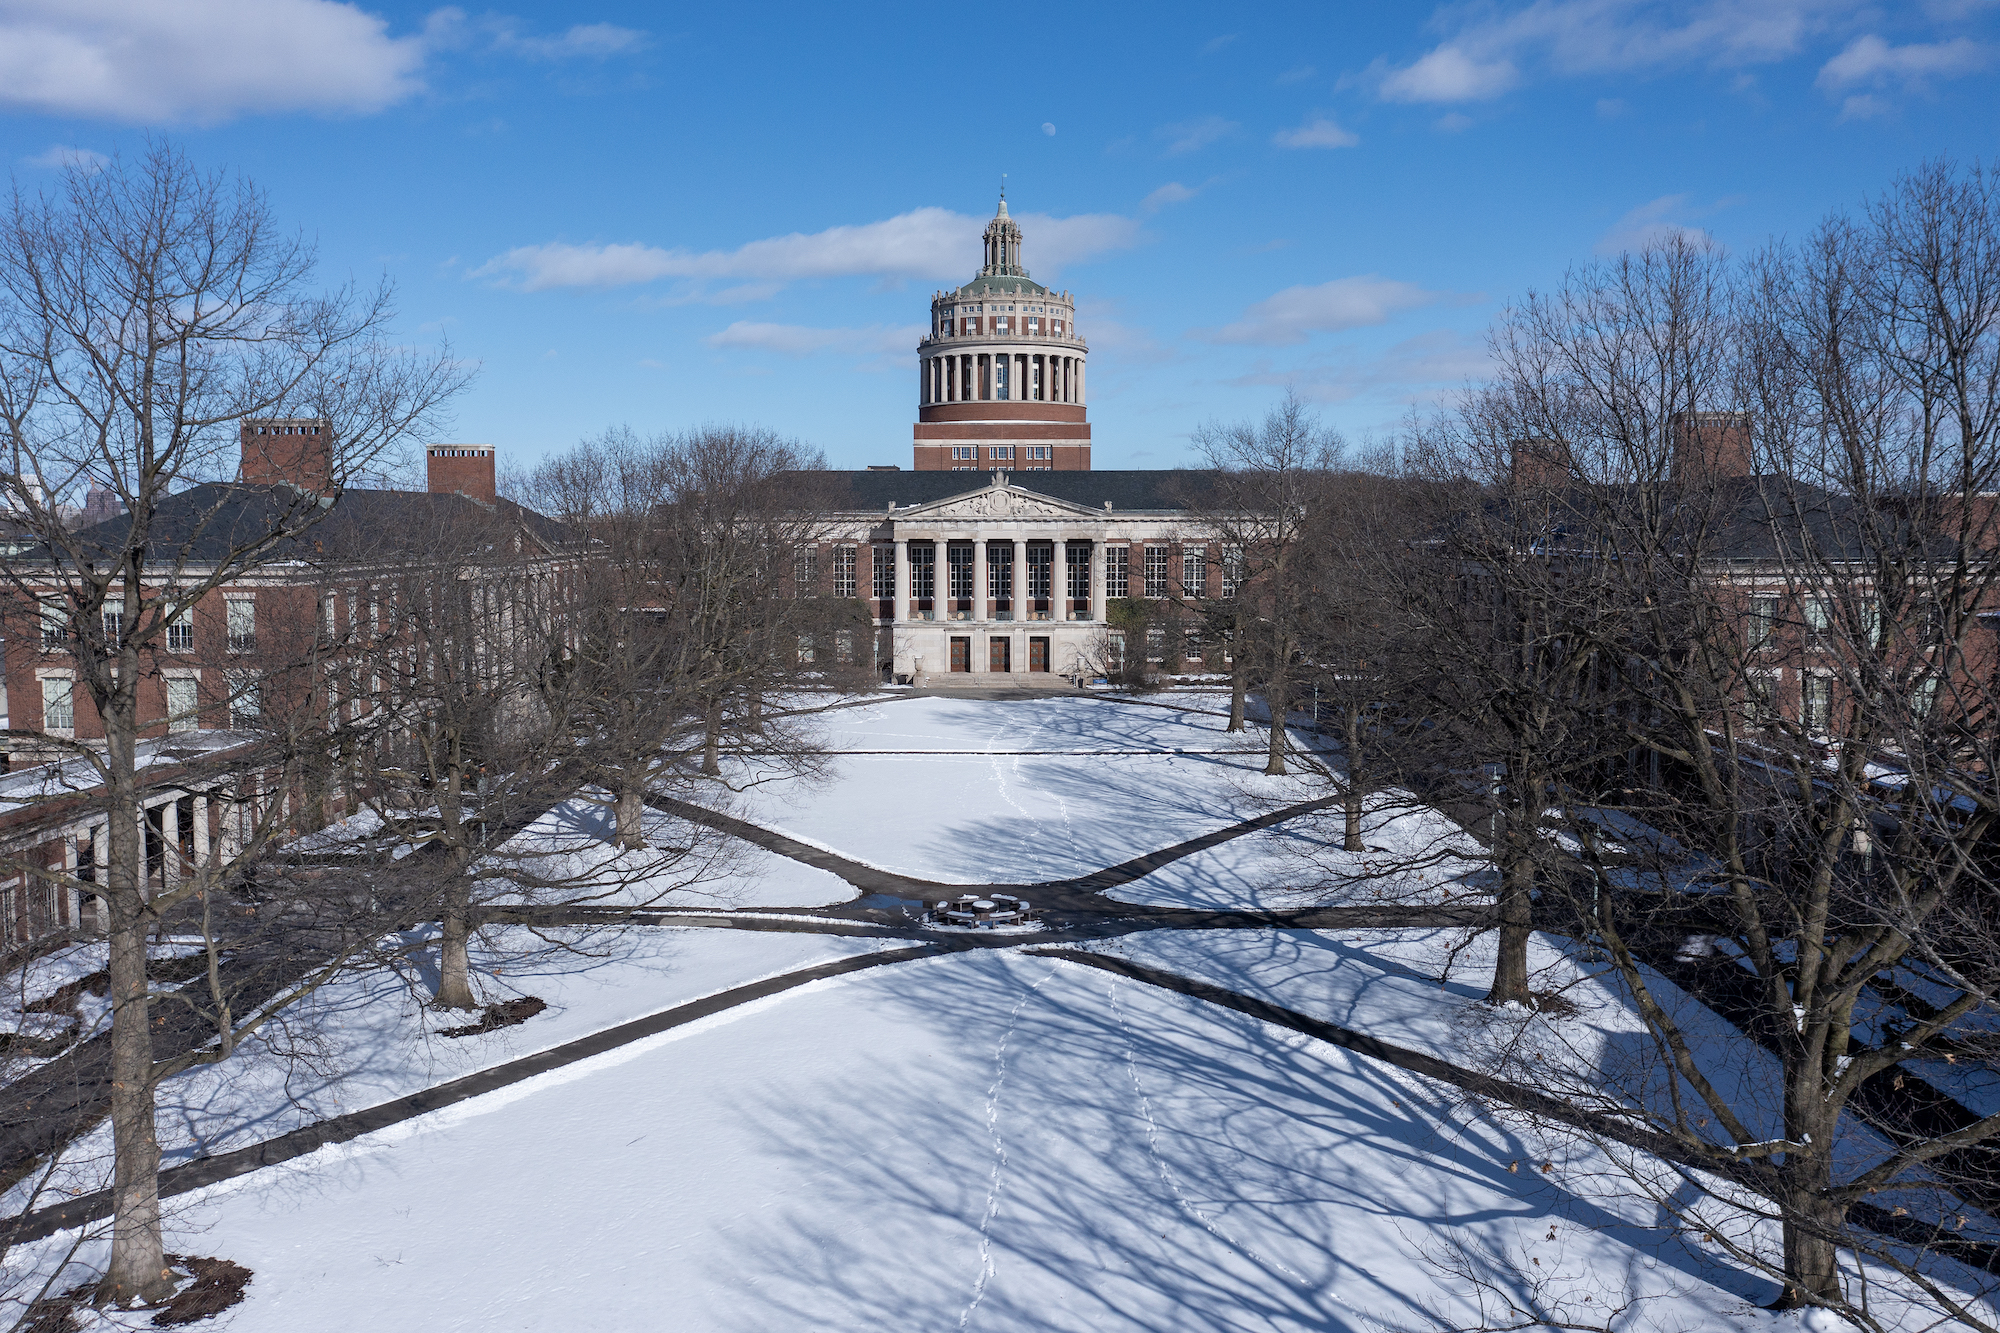 Snow covers the ground of the Eastman Quad, Rush Rhees Library ahead